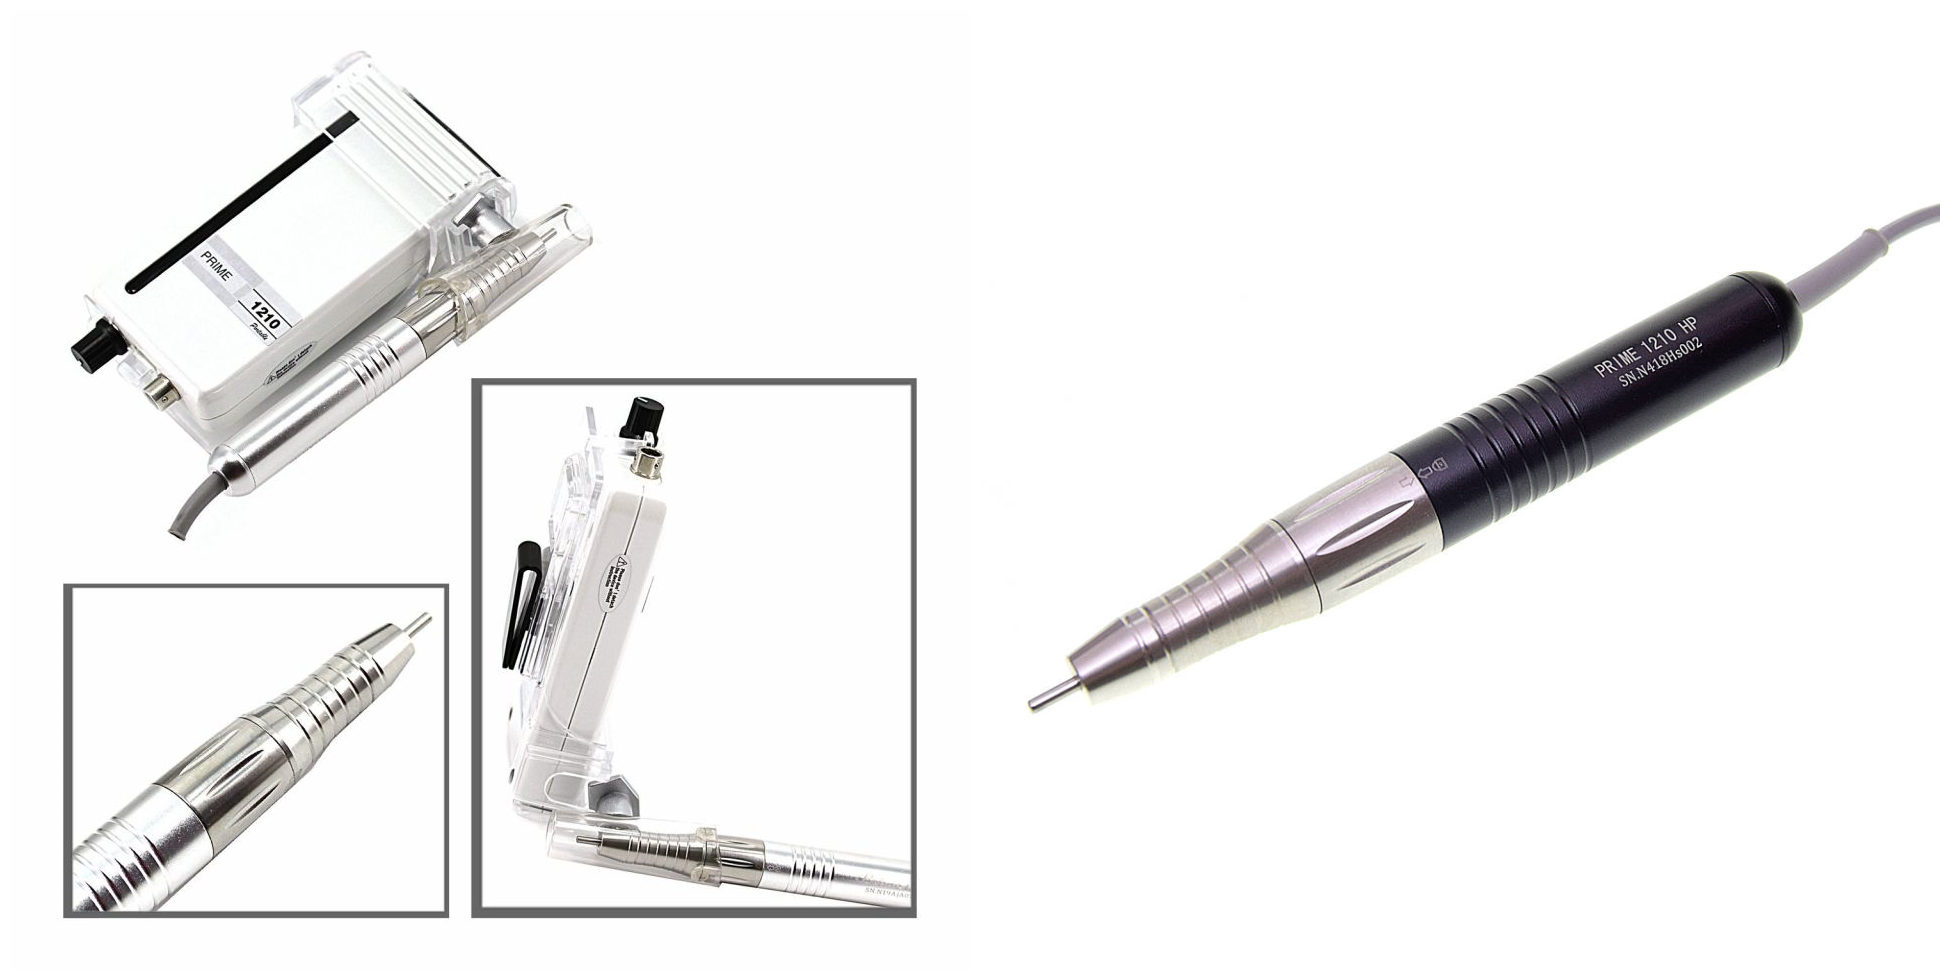 The best portable Nail Drill-Prime 1210-RHJC